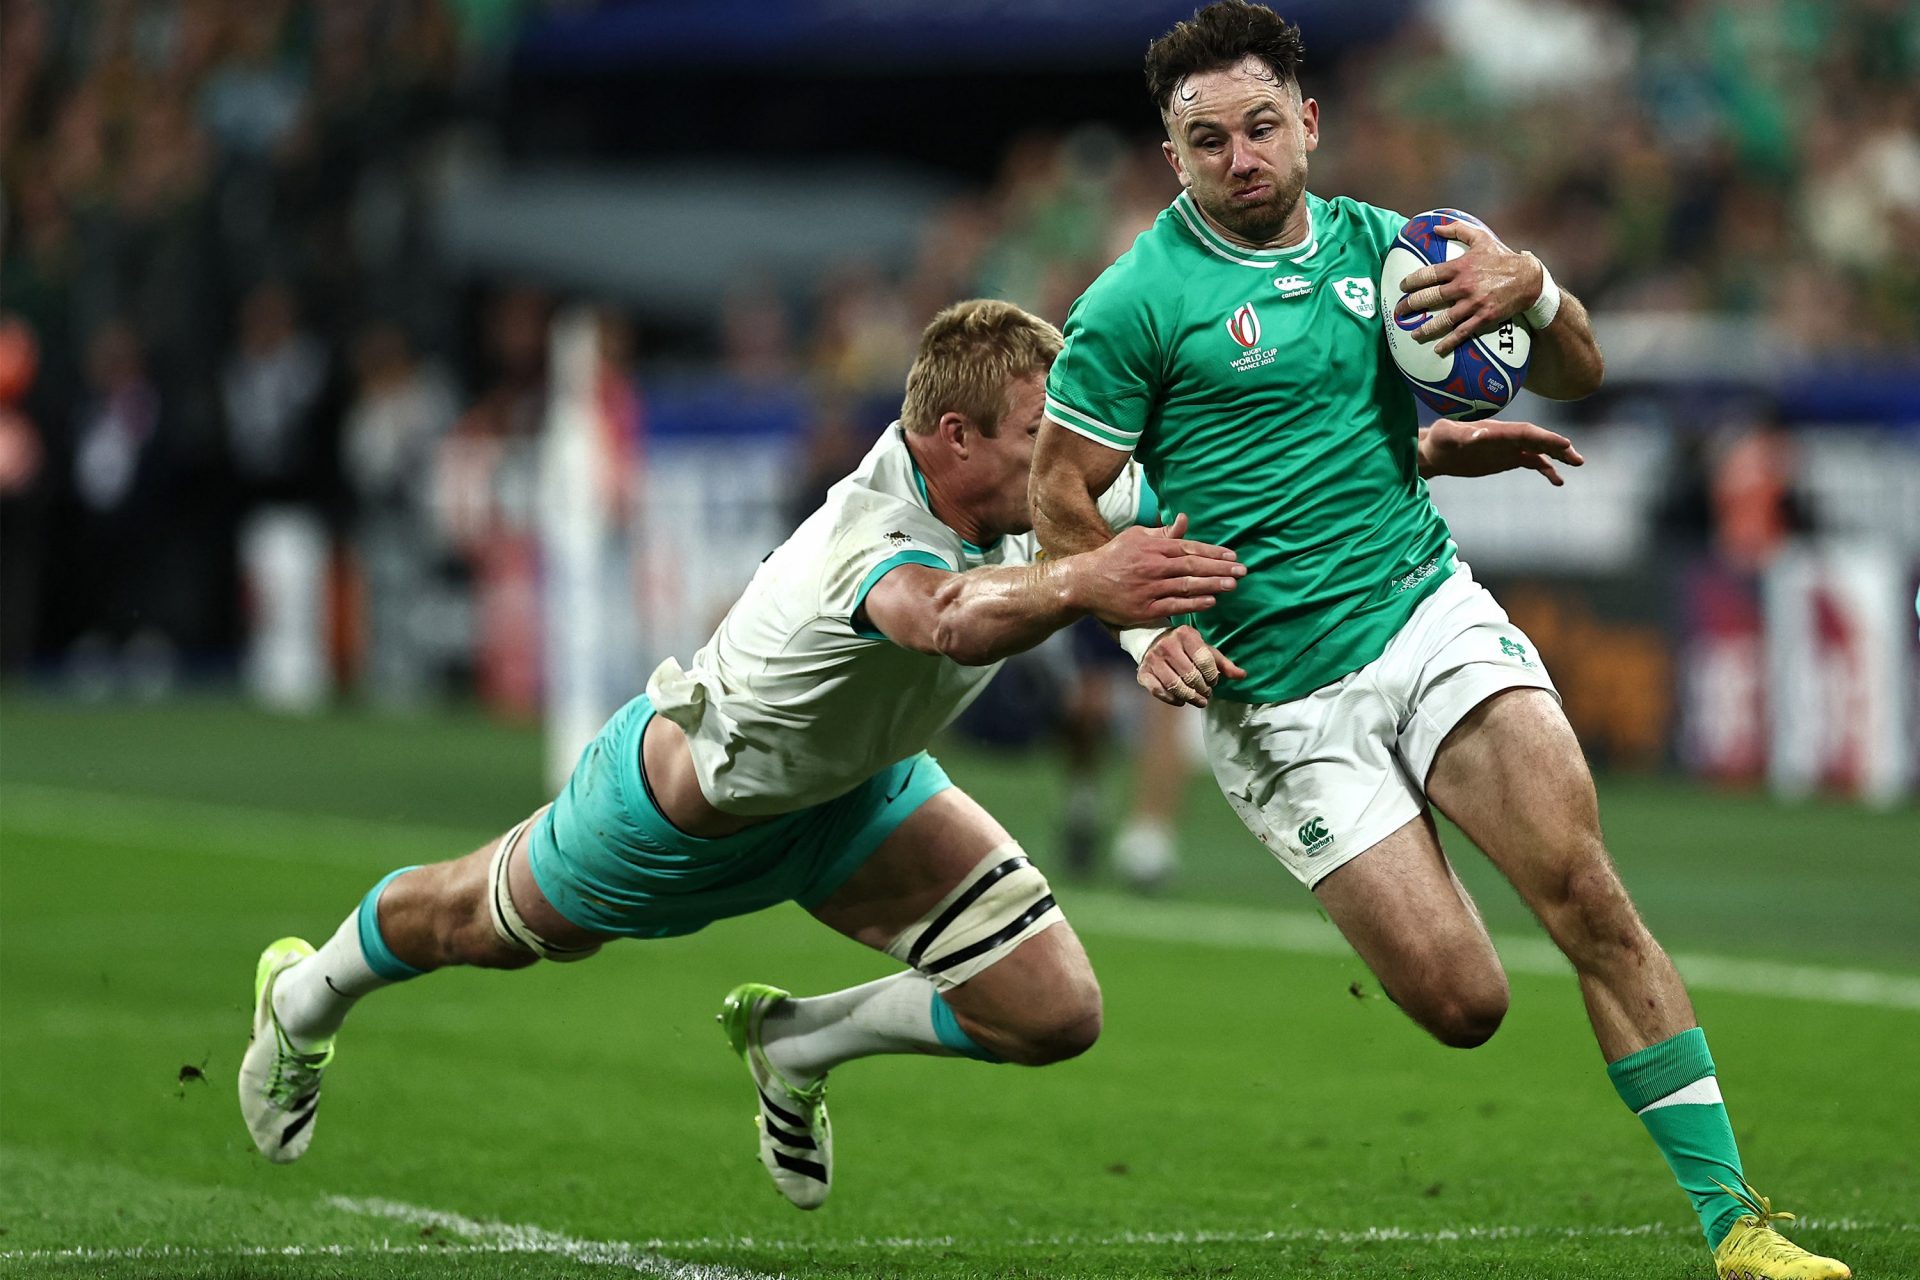 Ireland played extremely well